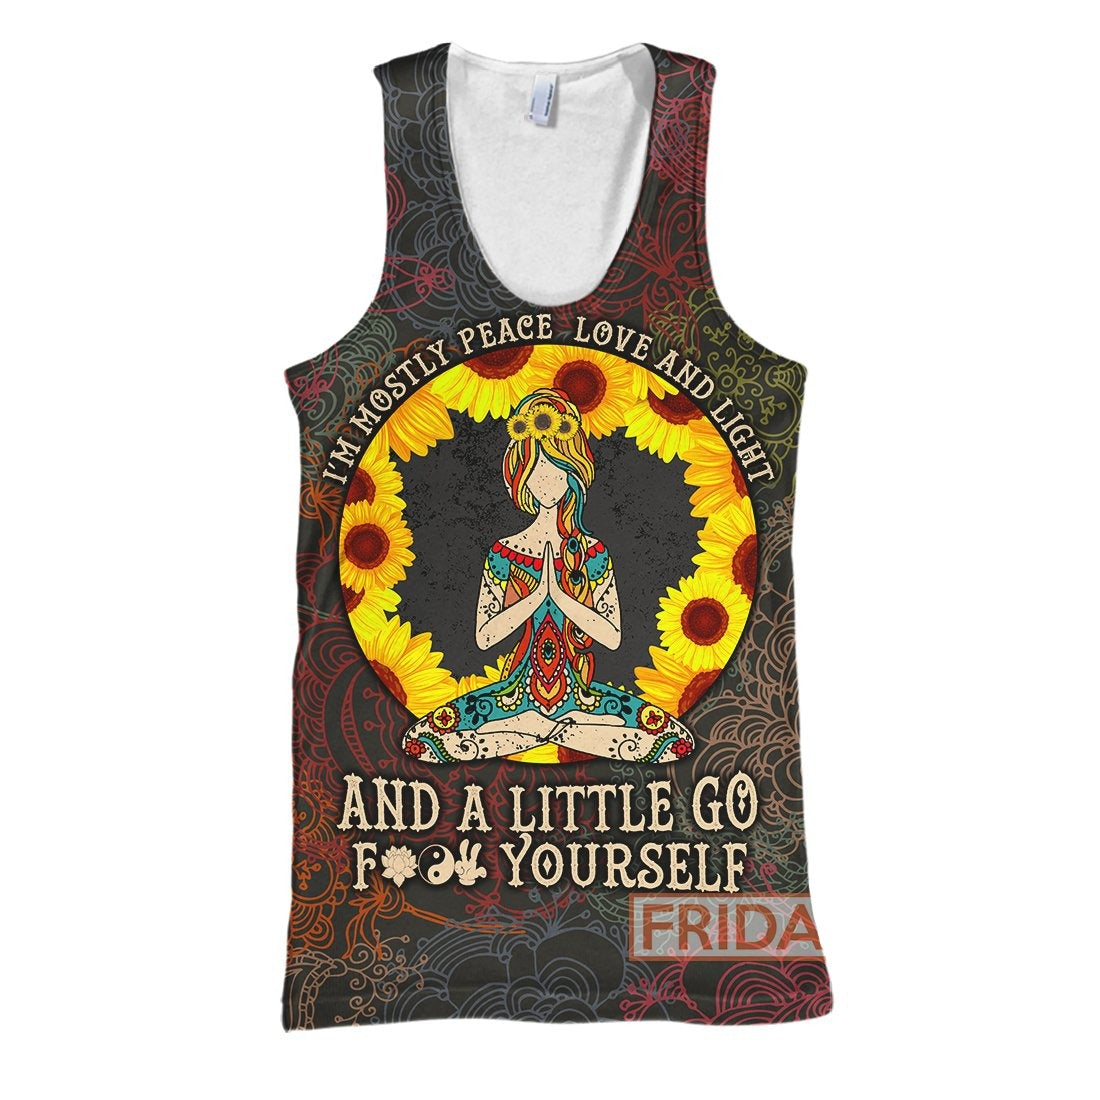 Unifinz Hippie T-shirt I'm Mostly Peace Love And Light T-shirt Awesome Hippie Hoodie Sweater Tank 2024